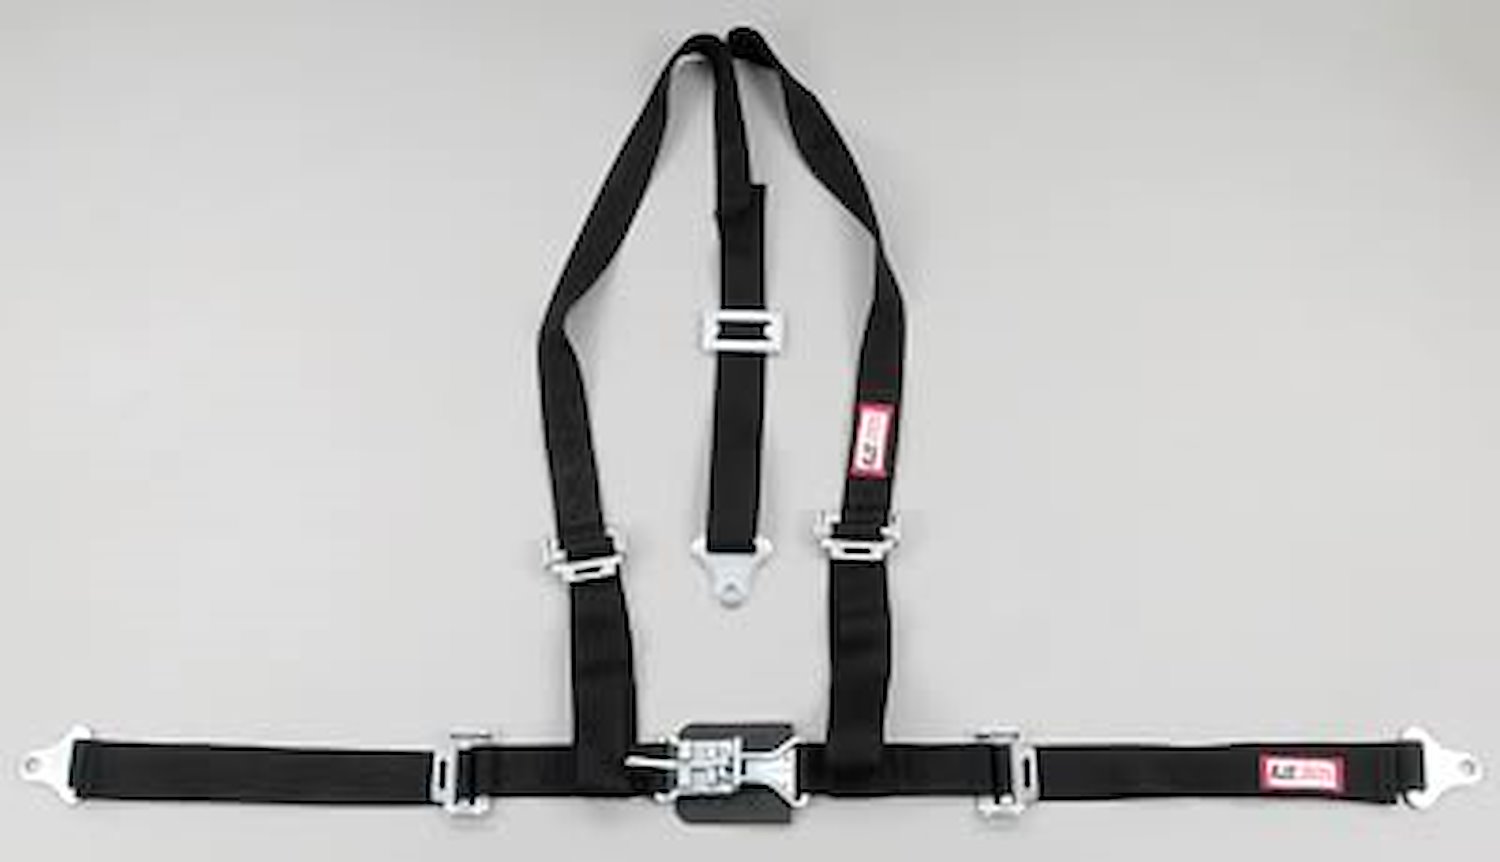 NON-SFI L&L HARNESS 3 PULL UP Lap Belt SEWN IN 2 S.H. Individual FLOOR Mount w/STERNUM STRAP ALL WRAP ENDS BLUE